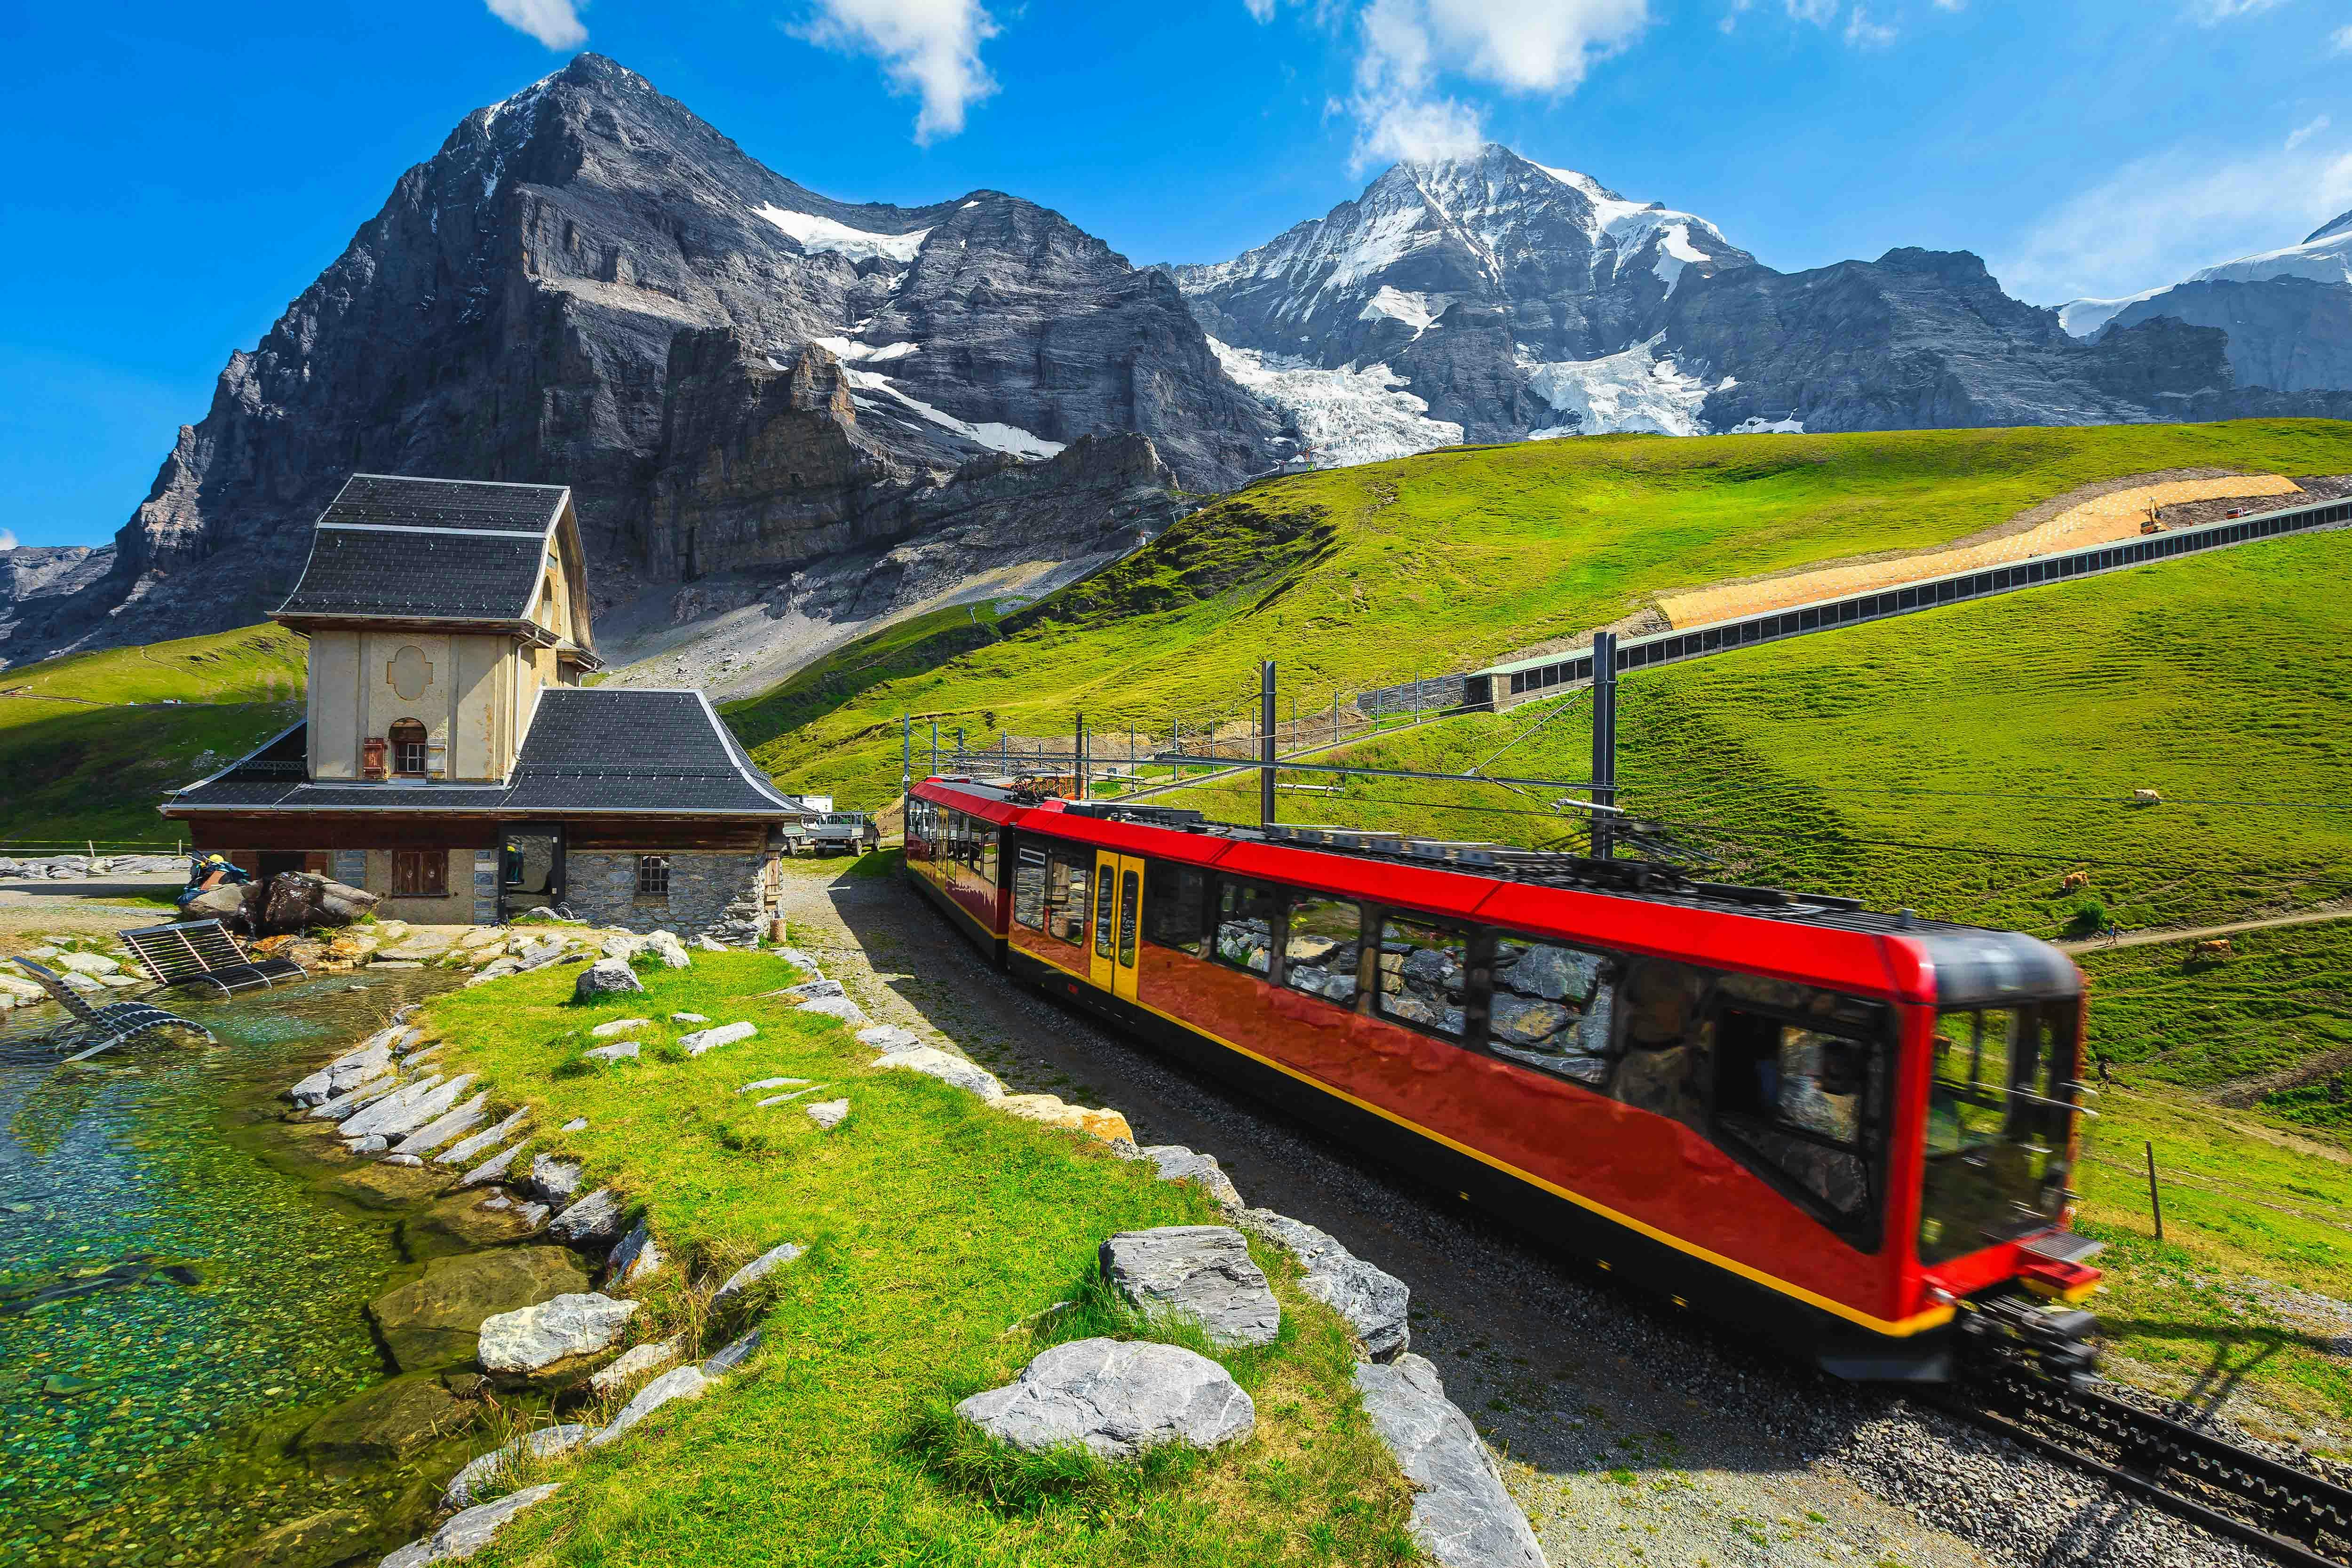 What is Jungfraujoch? | Explore History & Things to Do